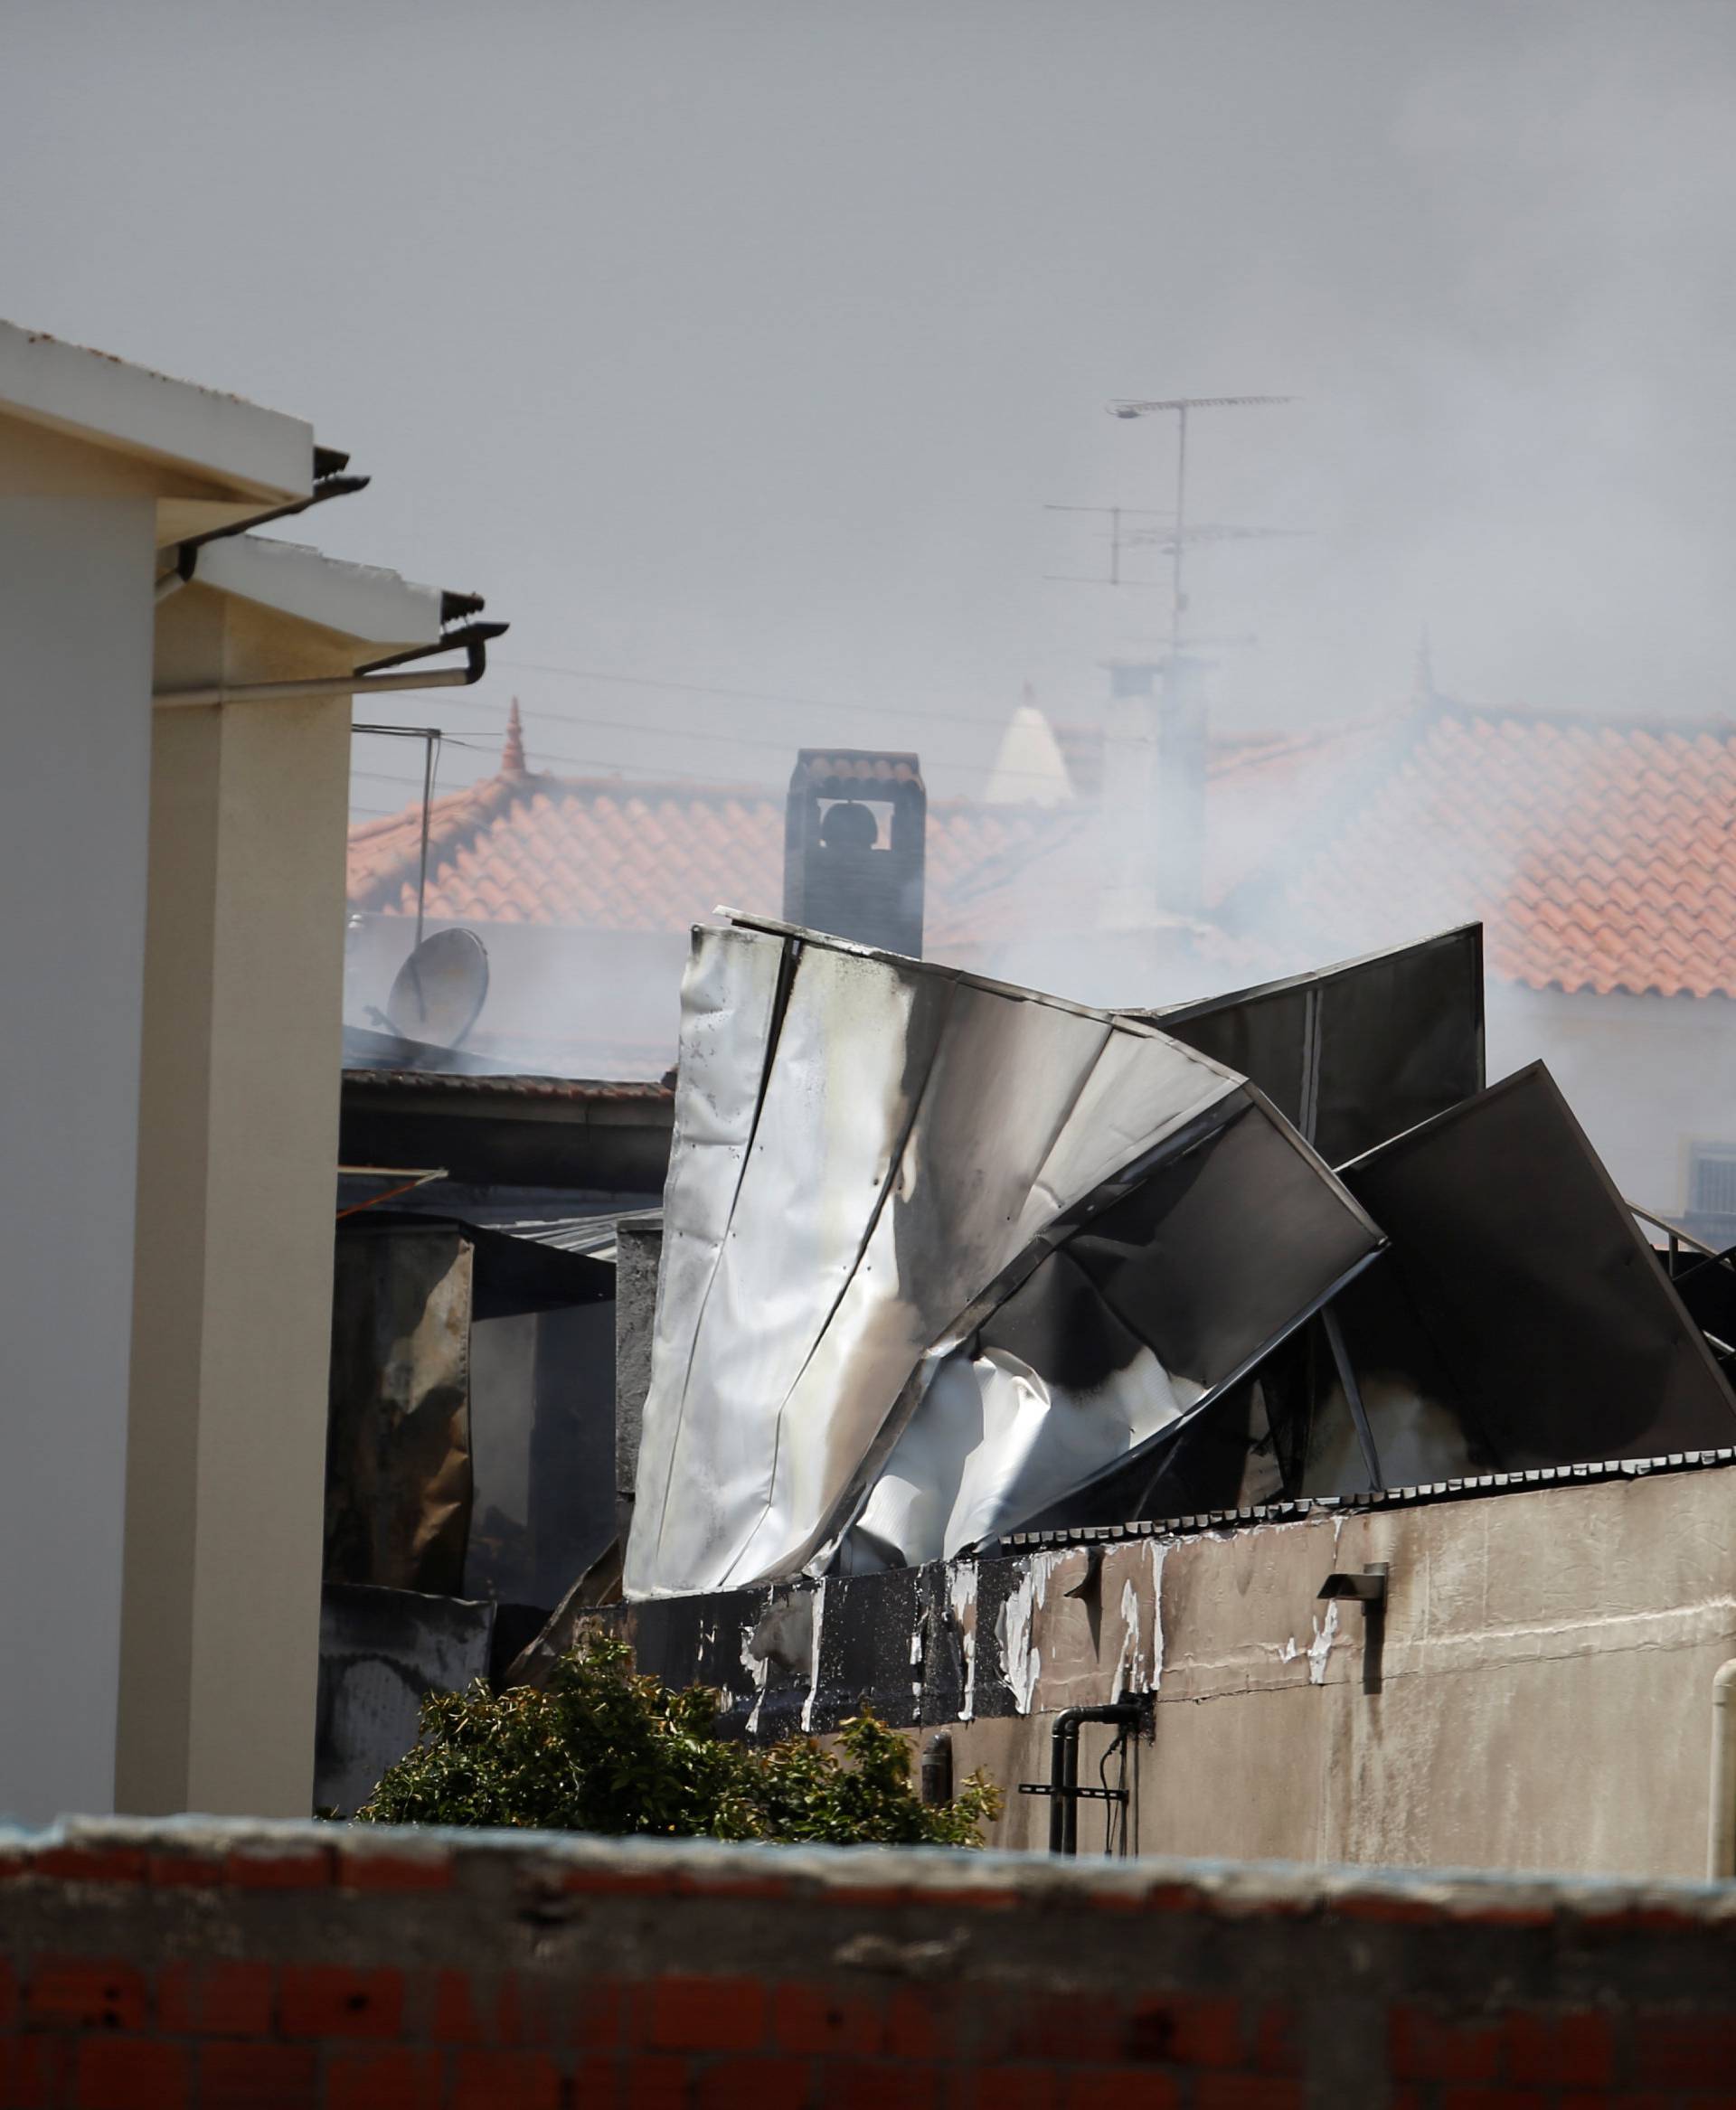 Smoke is seen where a small airplane crashed near a supermarket in a residential area outside Lisbon, Portugal